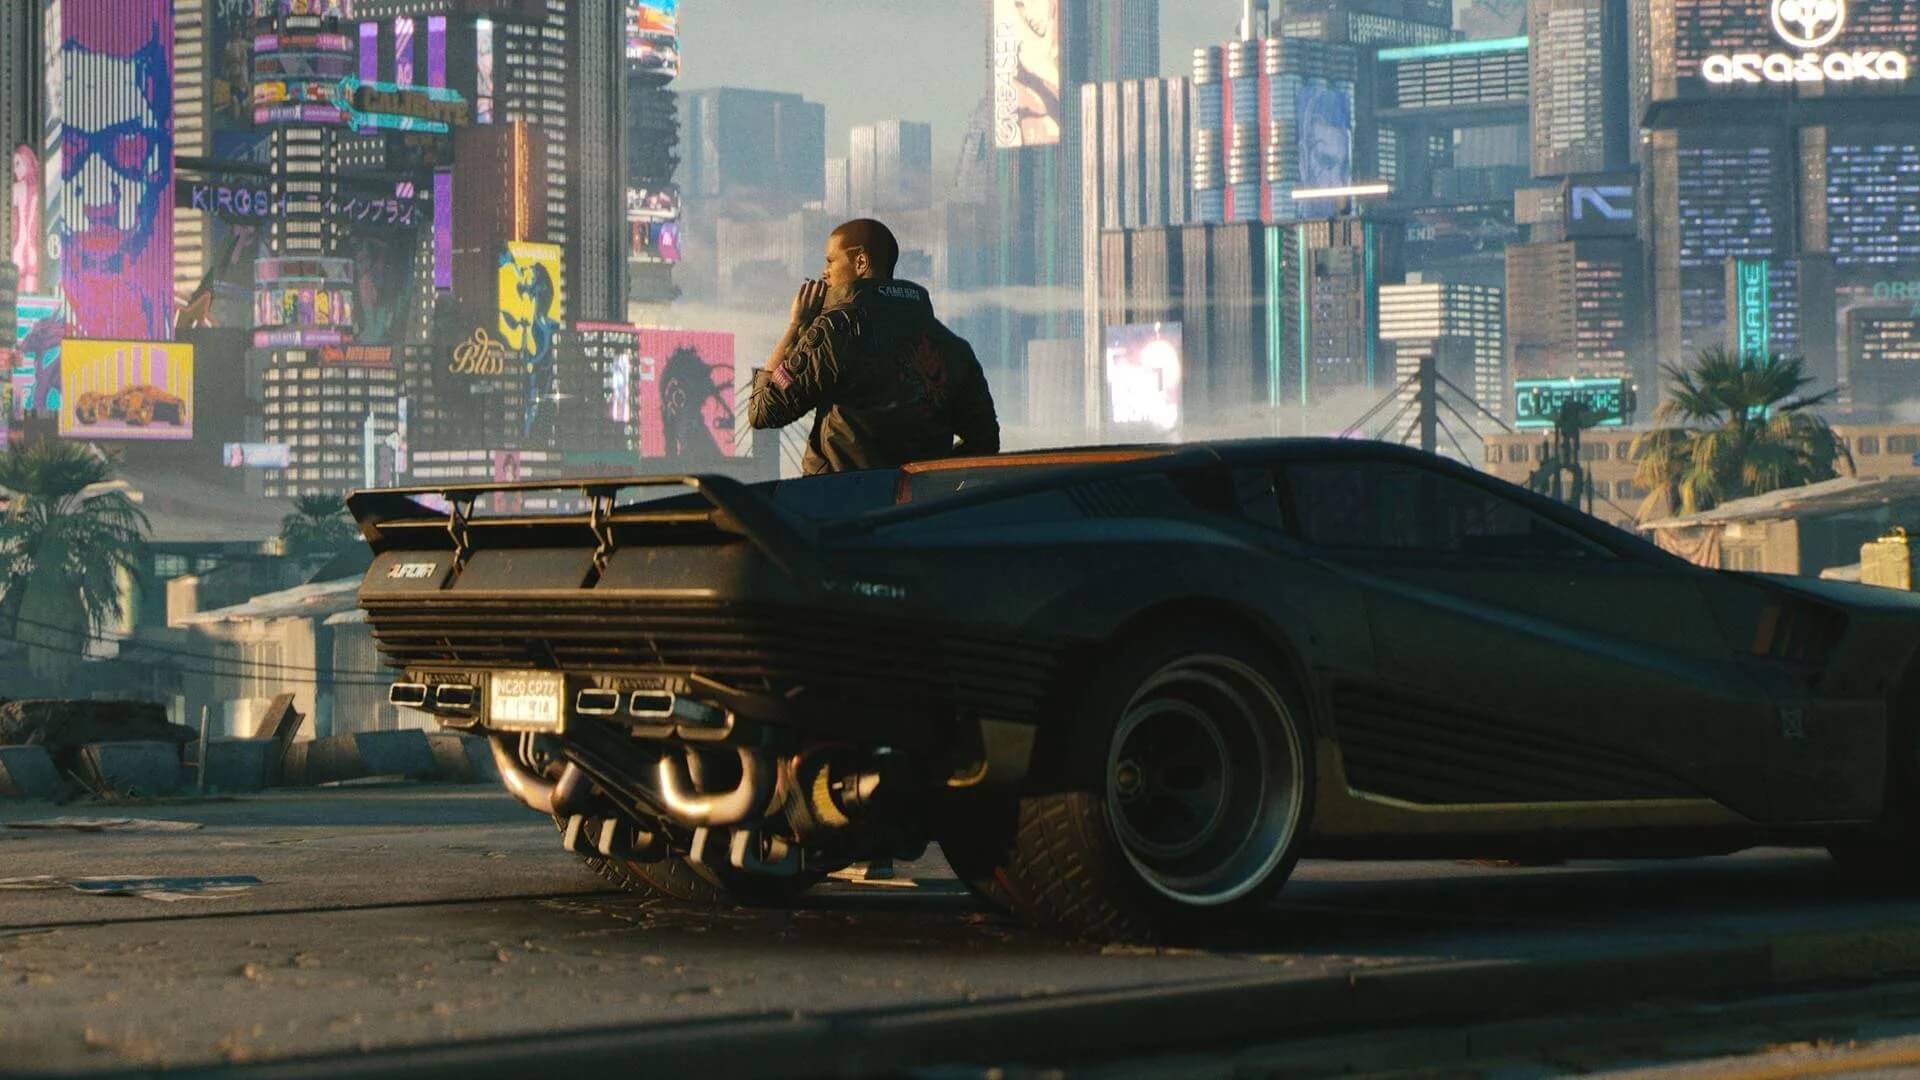 Cyberpunk 2077 may require a day-one patch that adds in missing voice work